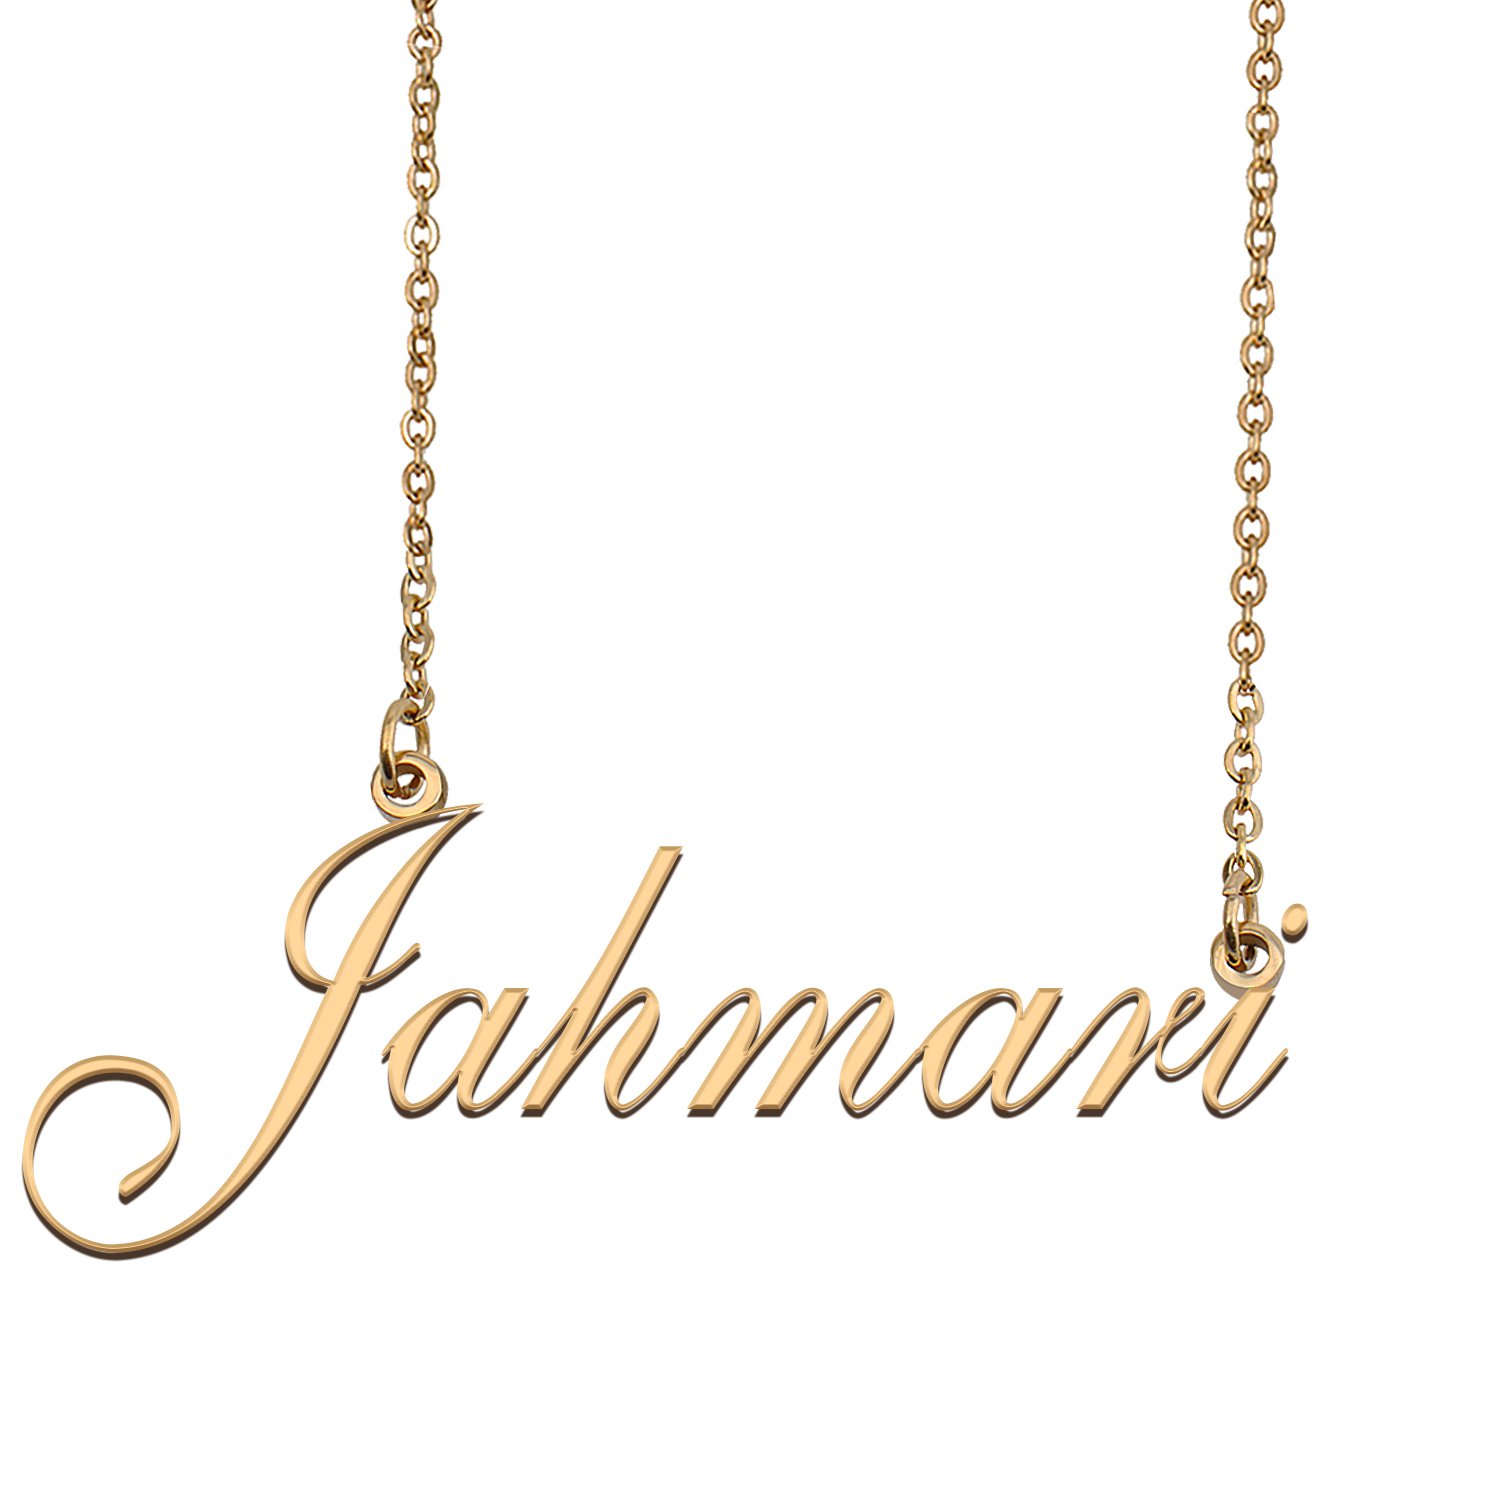 Personalized My Name Necklace Dainty personal Initial Necklace Jahmari